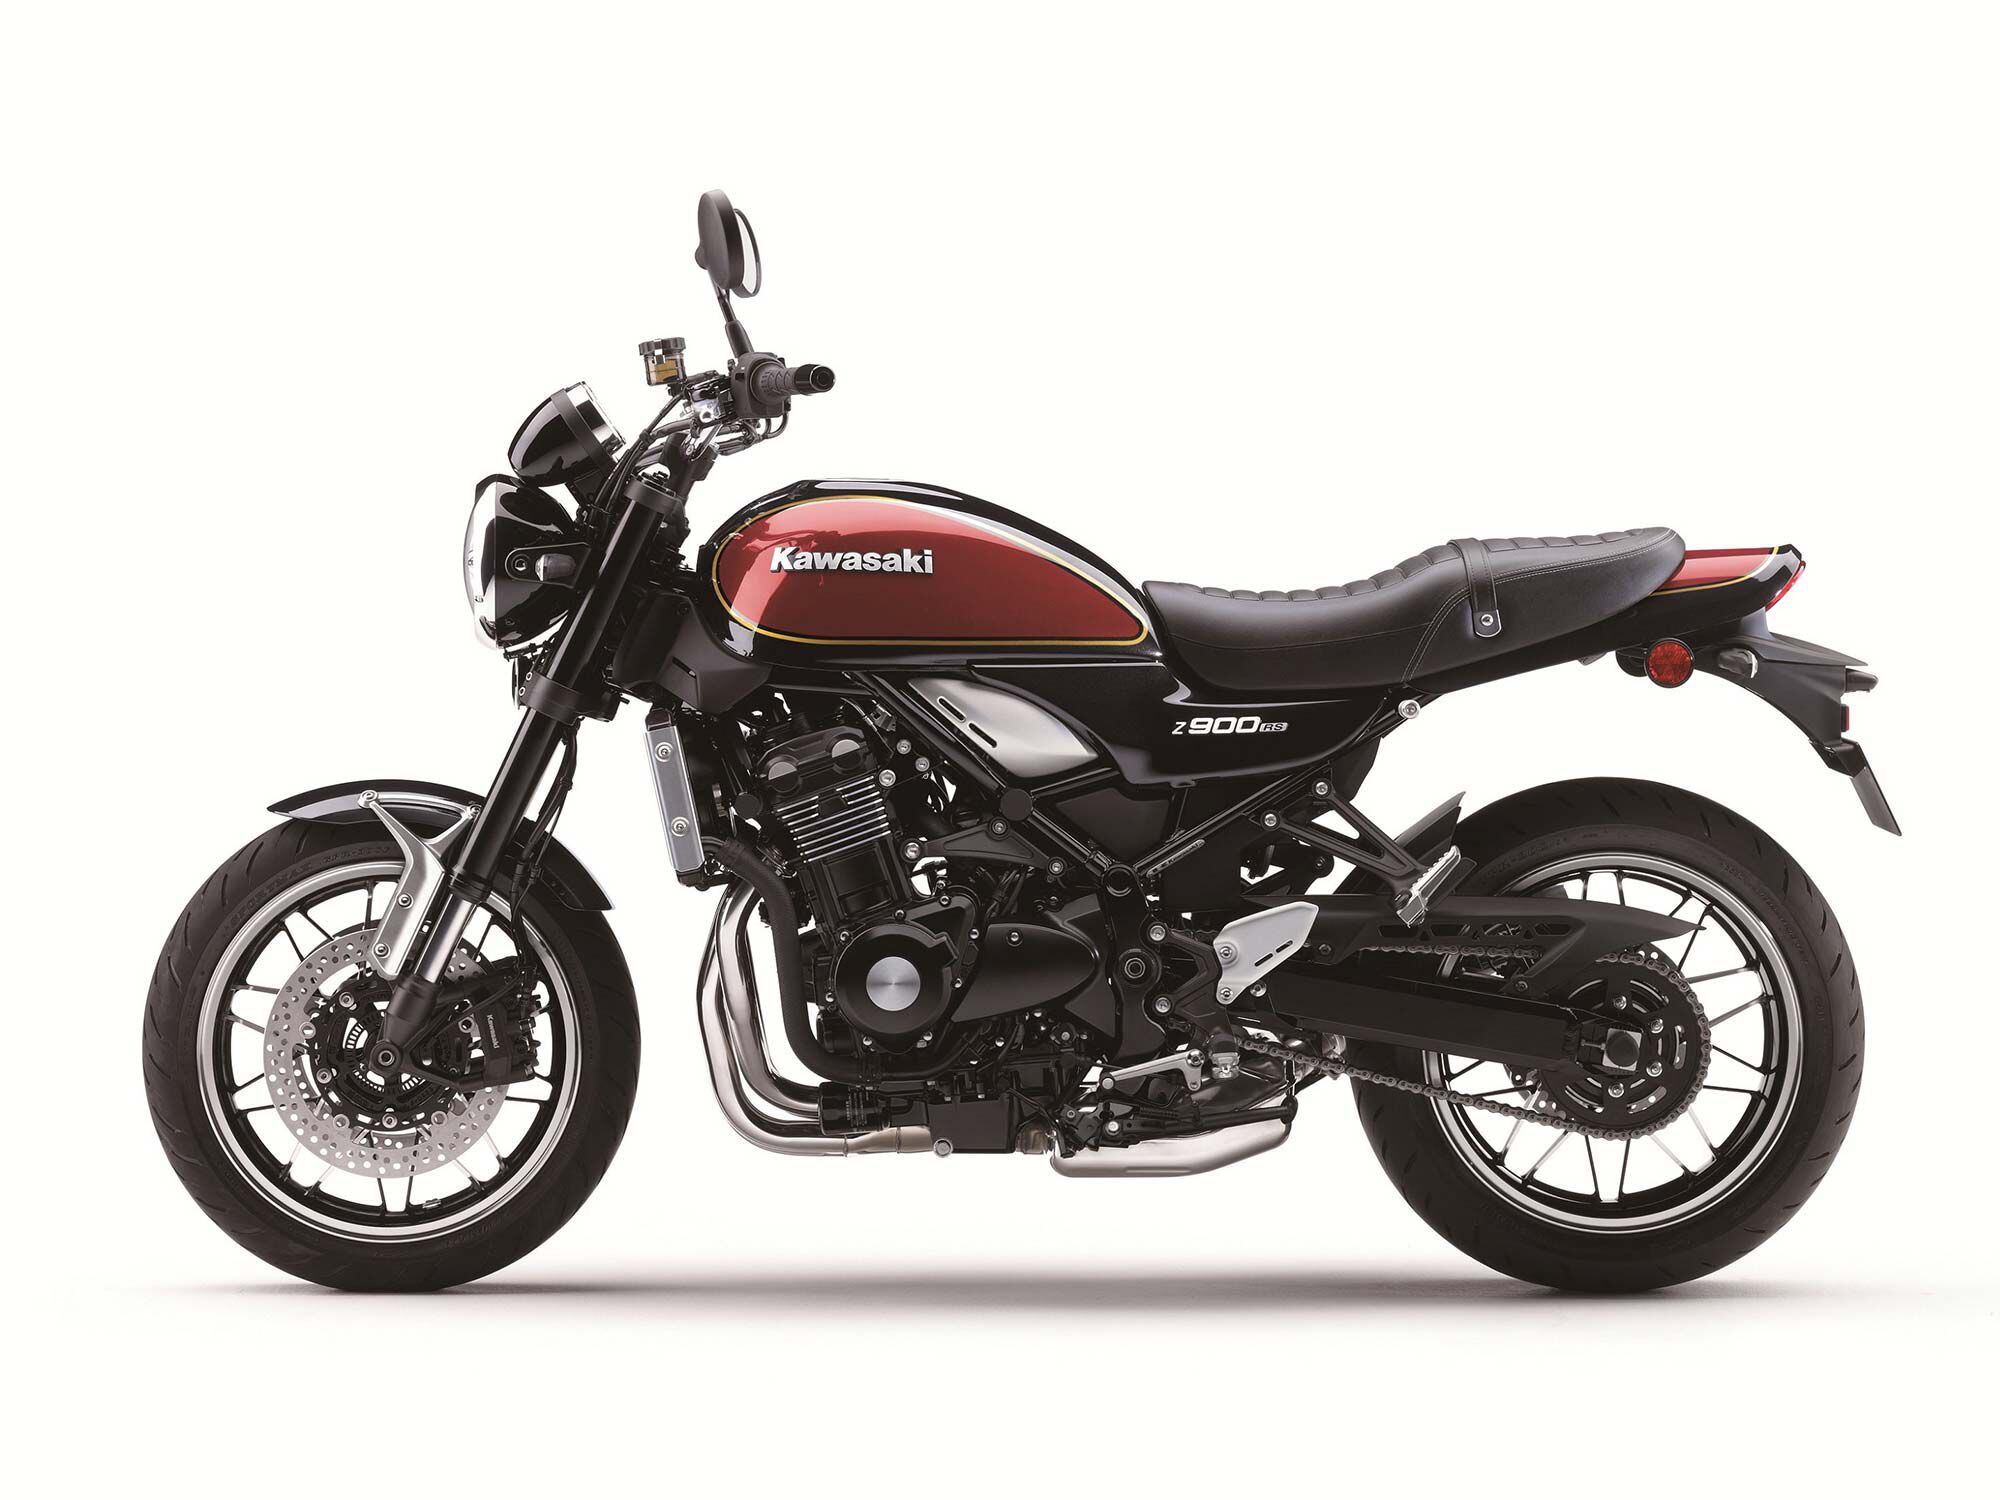 Retro cool is the name of the game for the Z900RS, which rolls into 2023 with a new Imperial Red colorway and a small price increase.